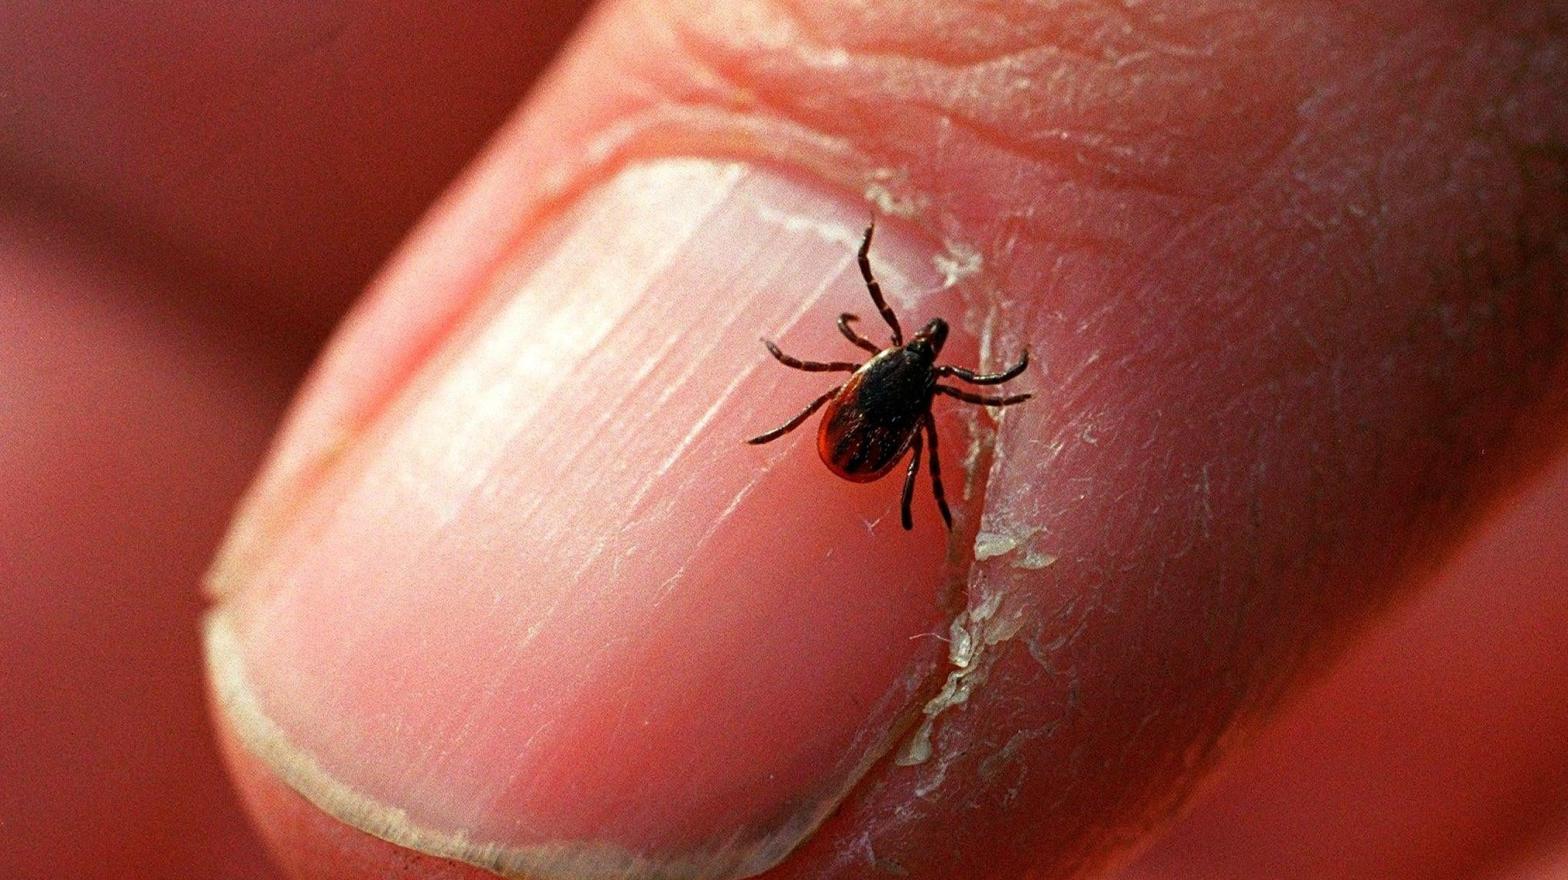 An adult deer tick at Connetquot State Park in Oakdale, New York on December 27, 2011. (Photo: Bill Davis/Newsday RM, Getty Images)